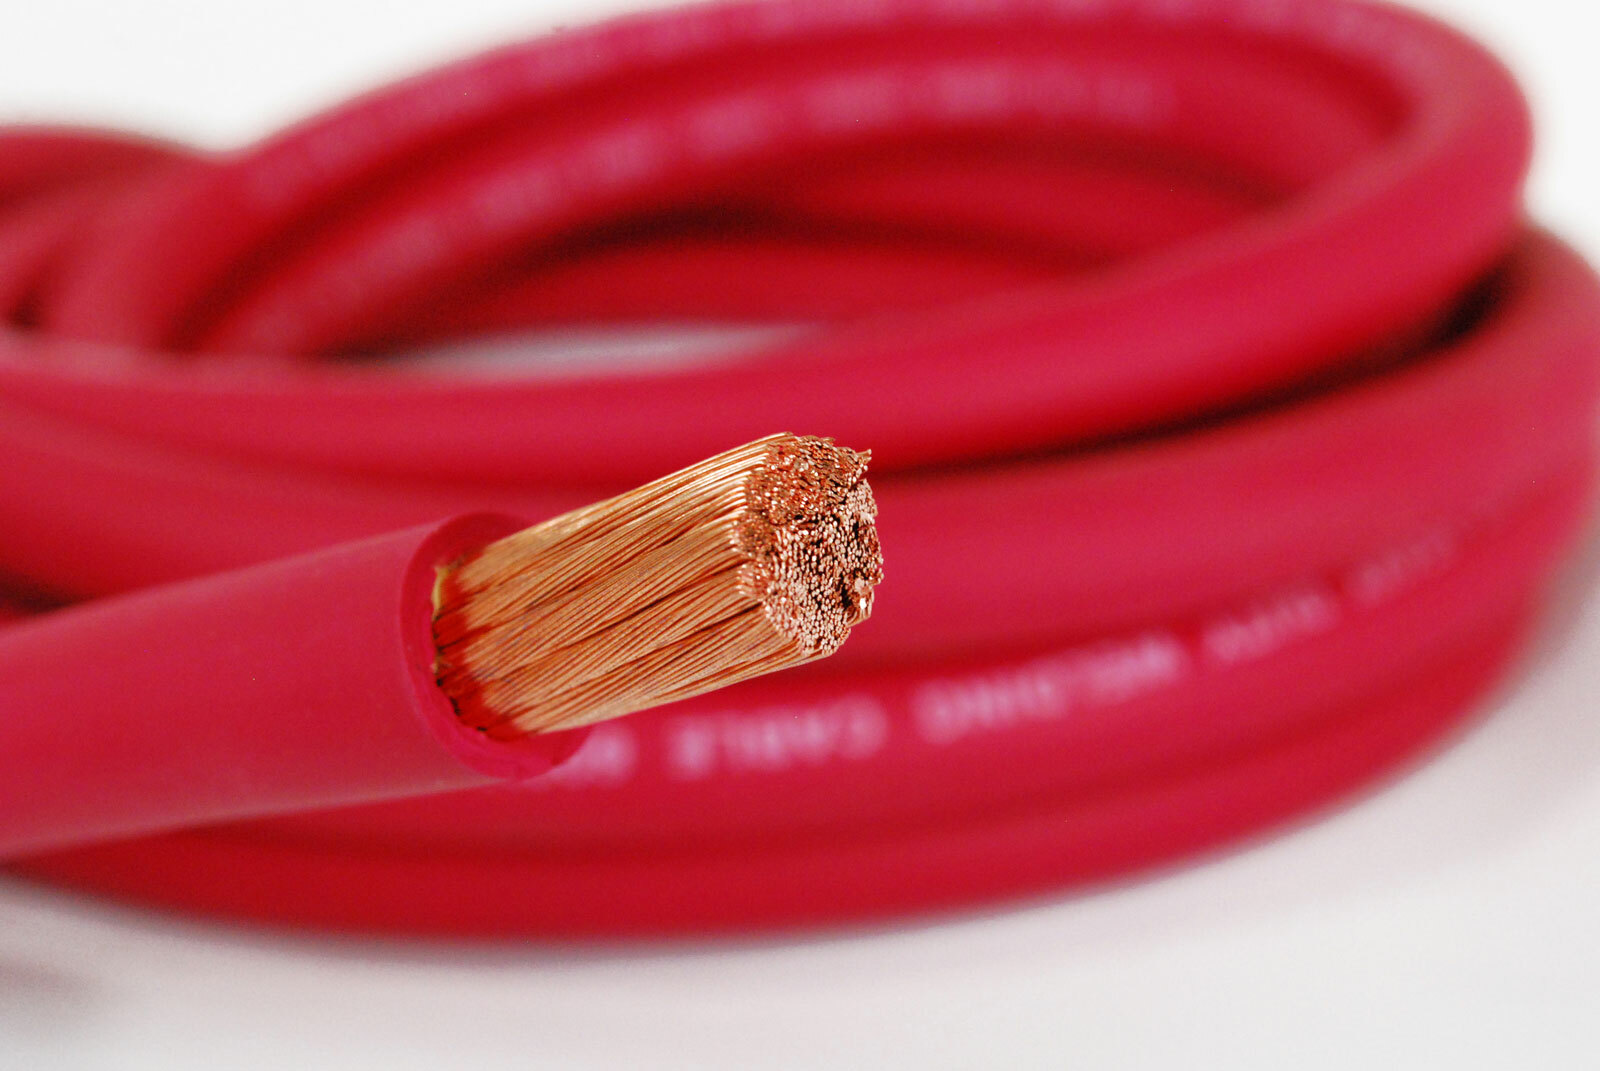 10mm2 / #8 AWG . RED BATTERY CABLE 70AMP 840WATTS RATED 1 mtr